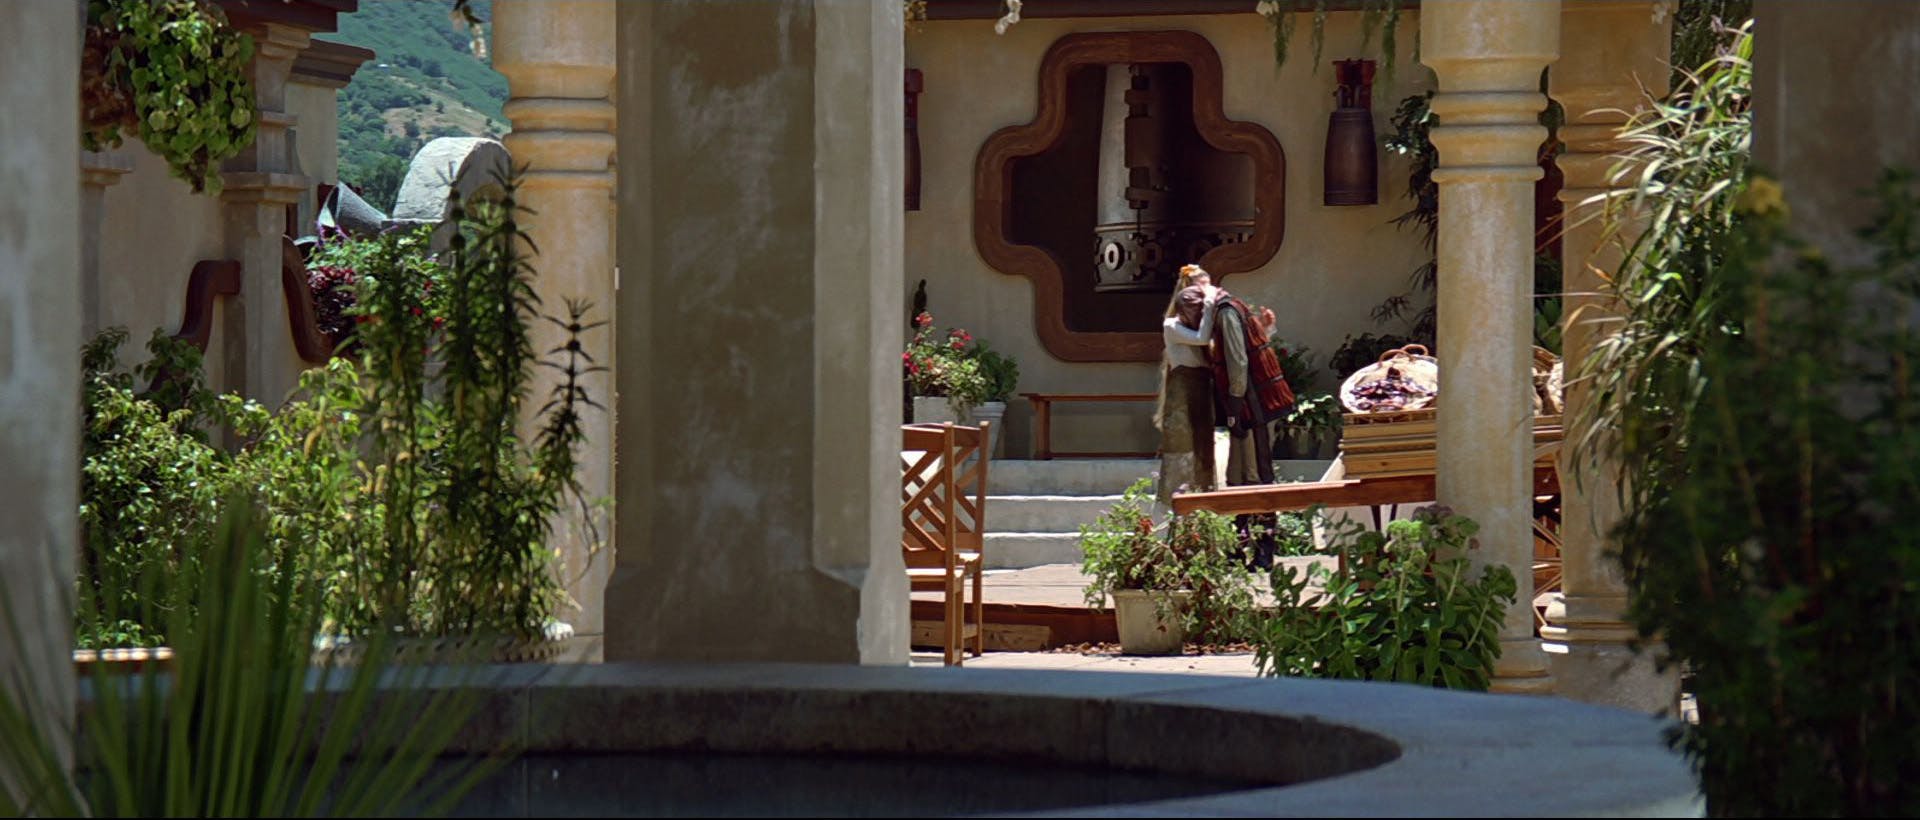 Sojef, Anji, and Picard witness a regretful Gallatin embracing his mother in Star Trek: Insurrection